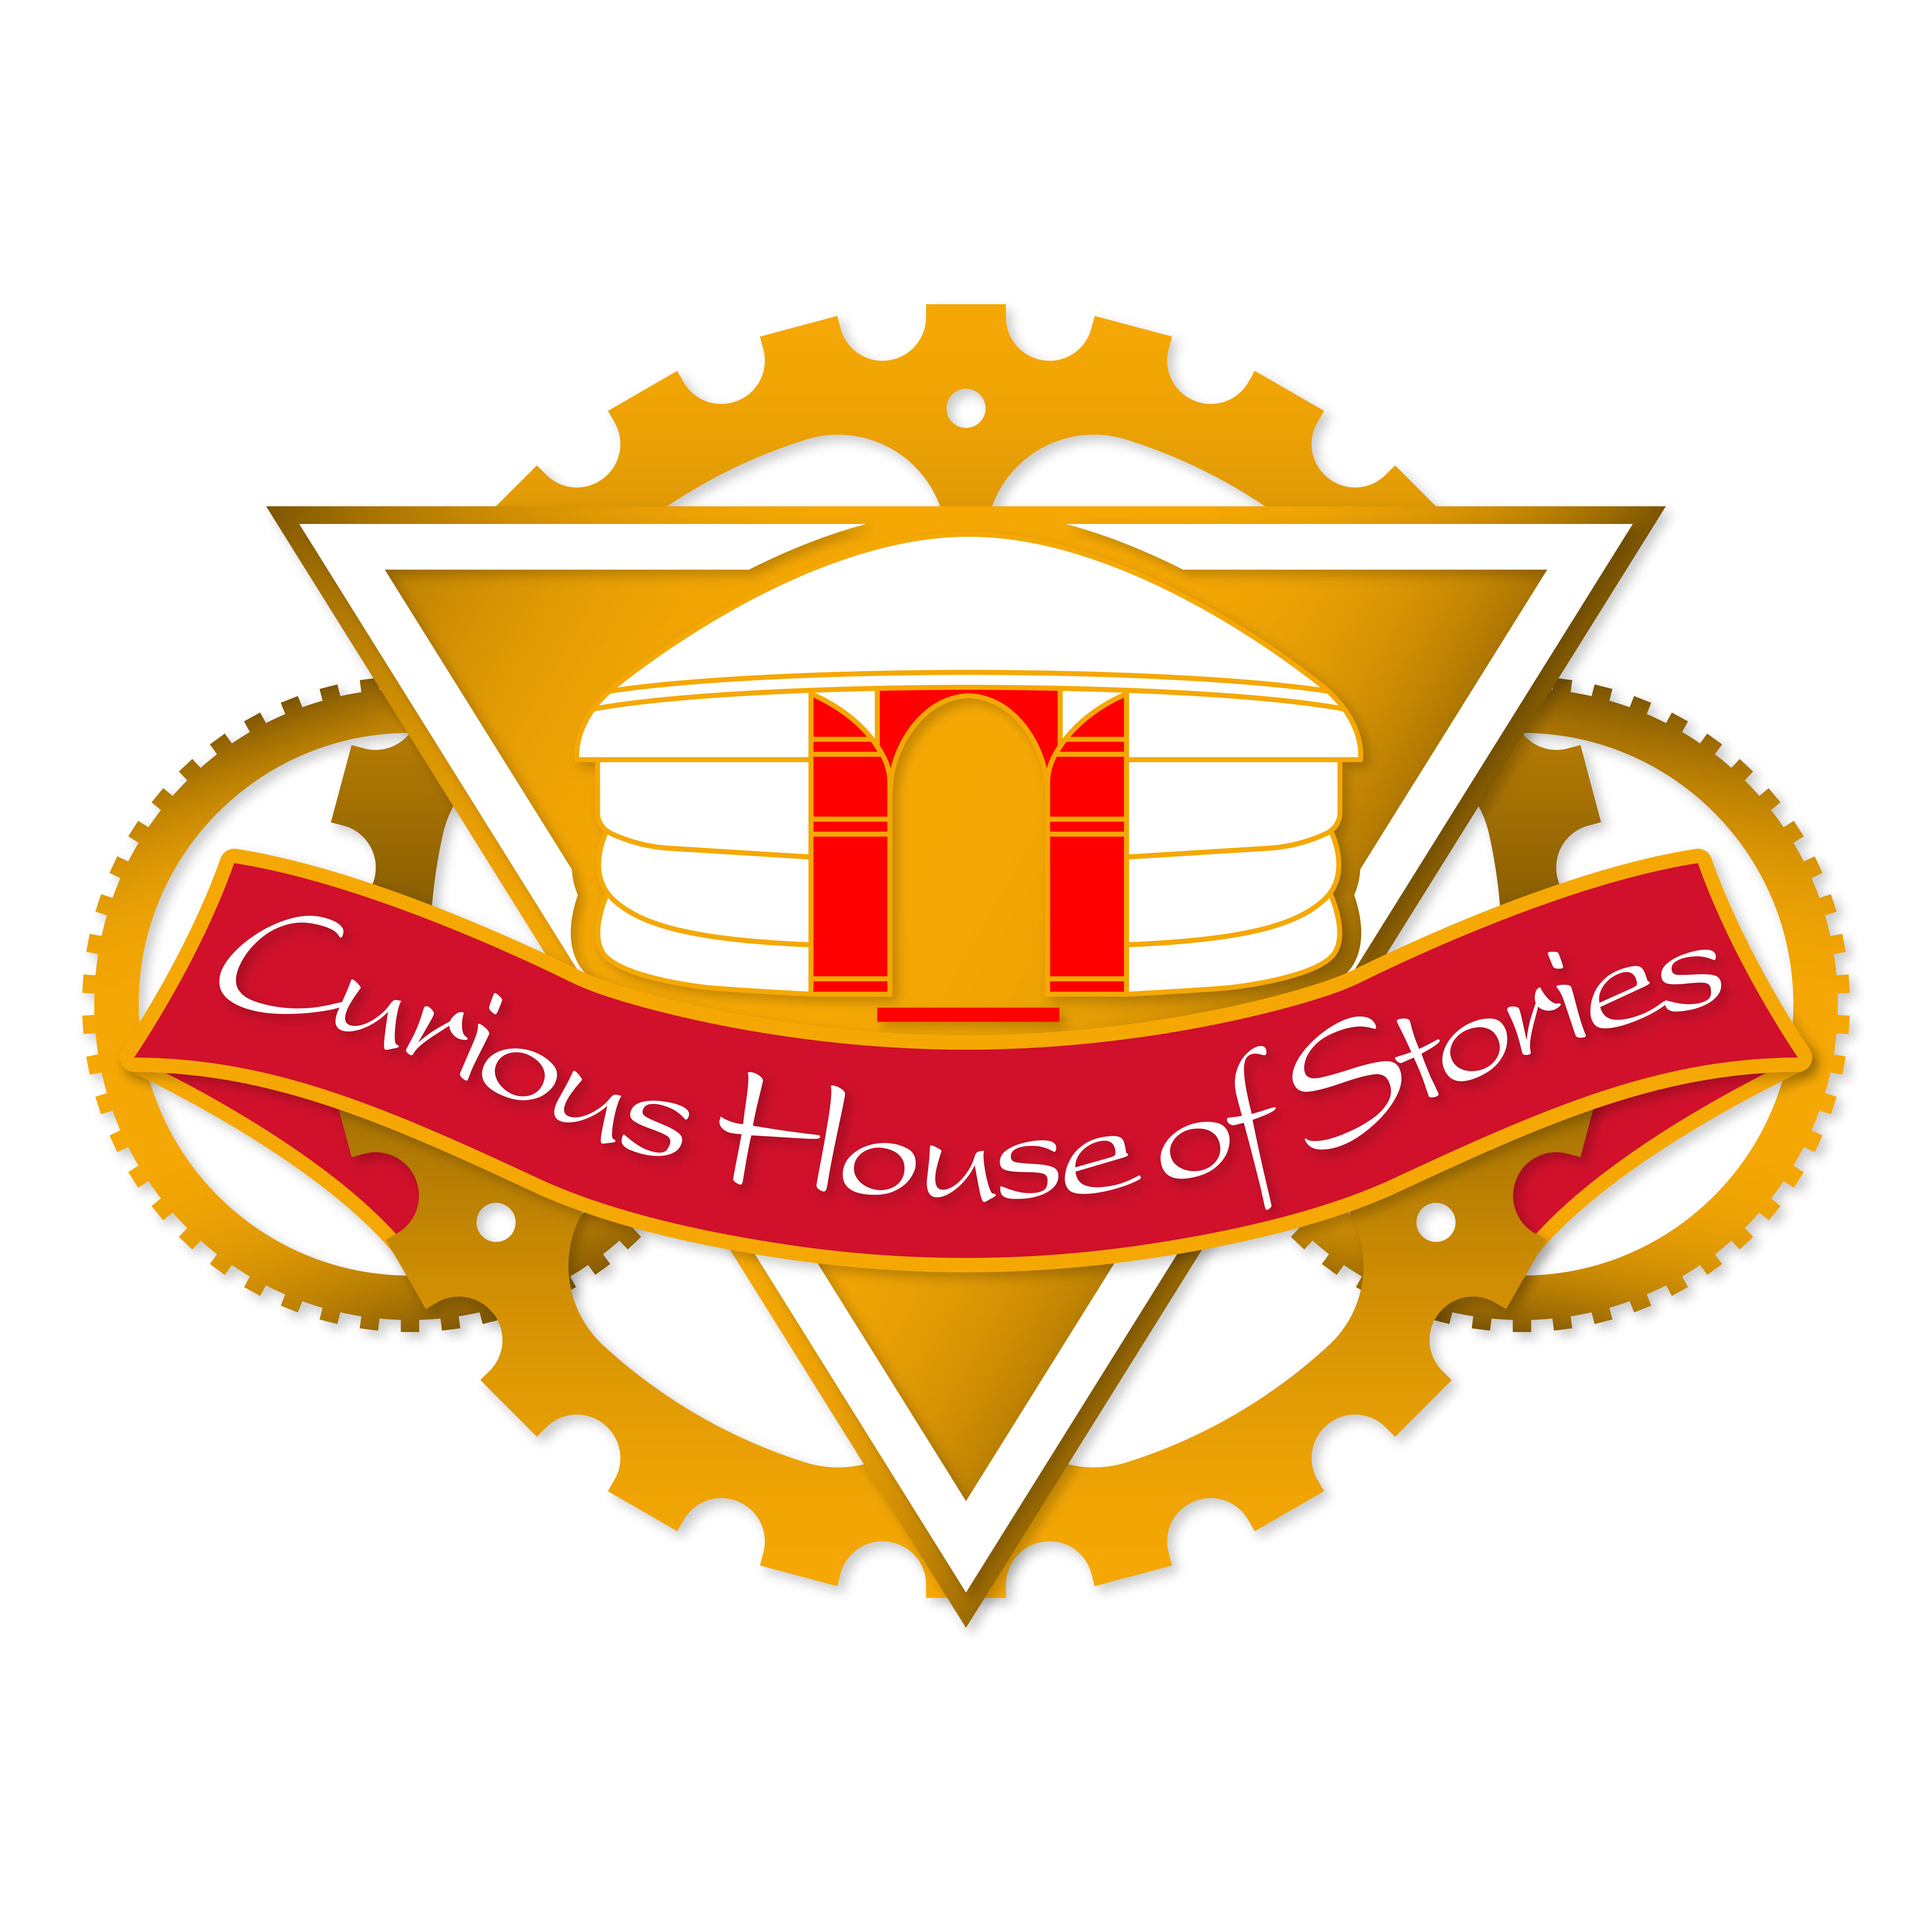 Curious House of Stories